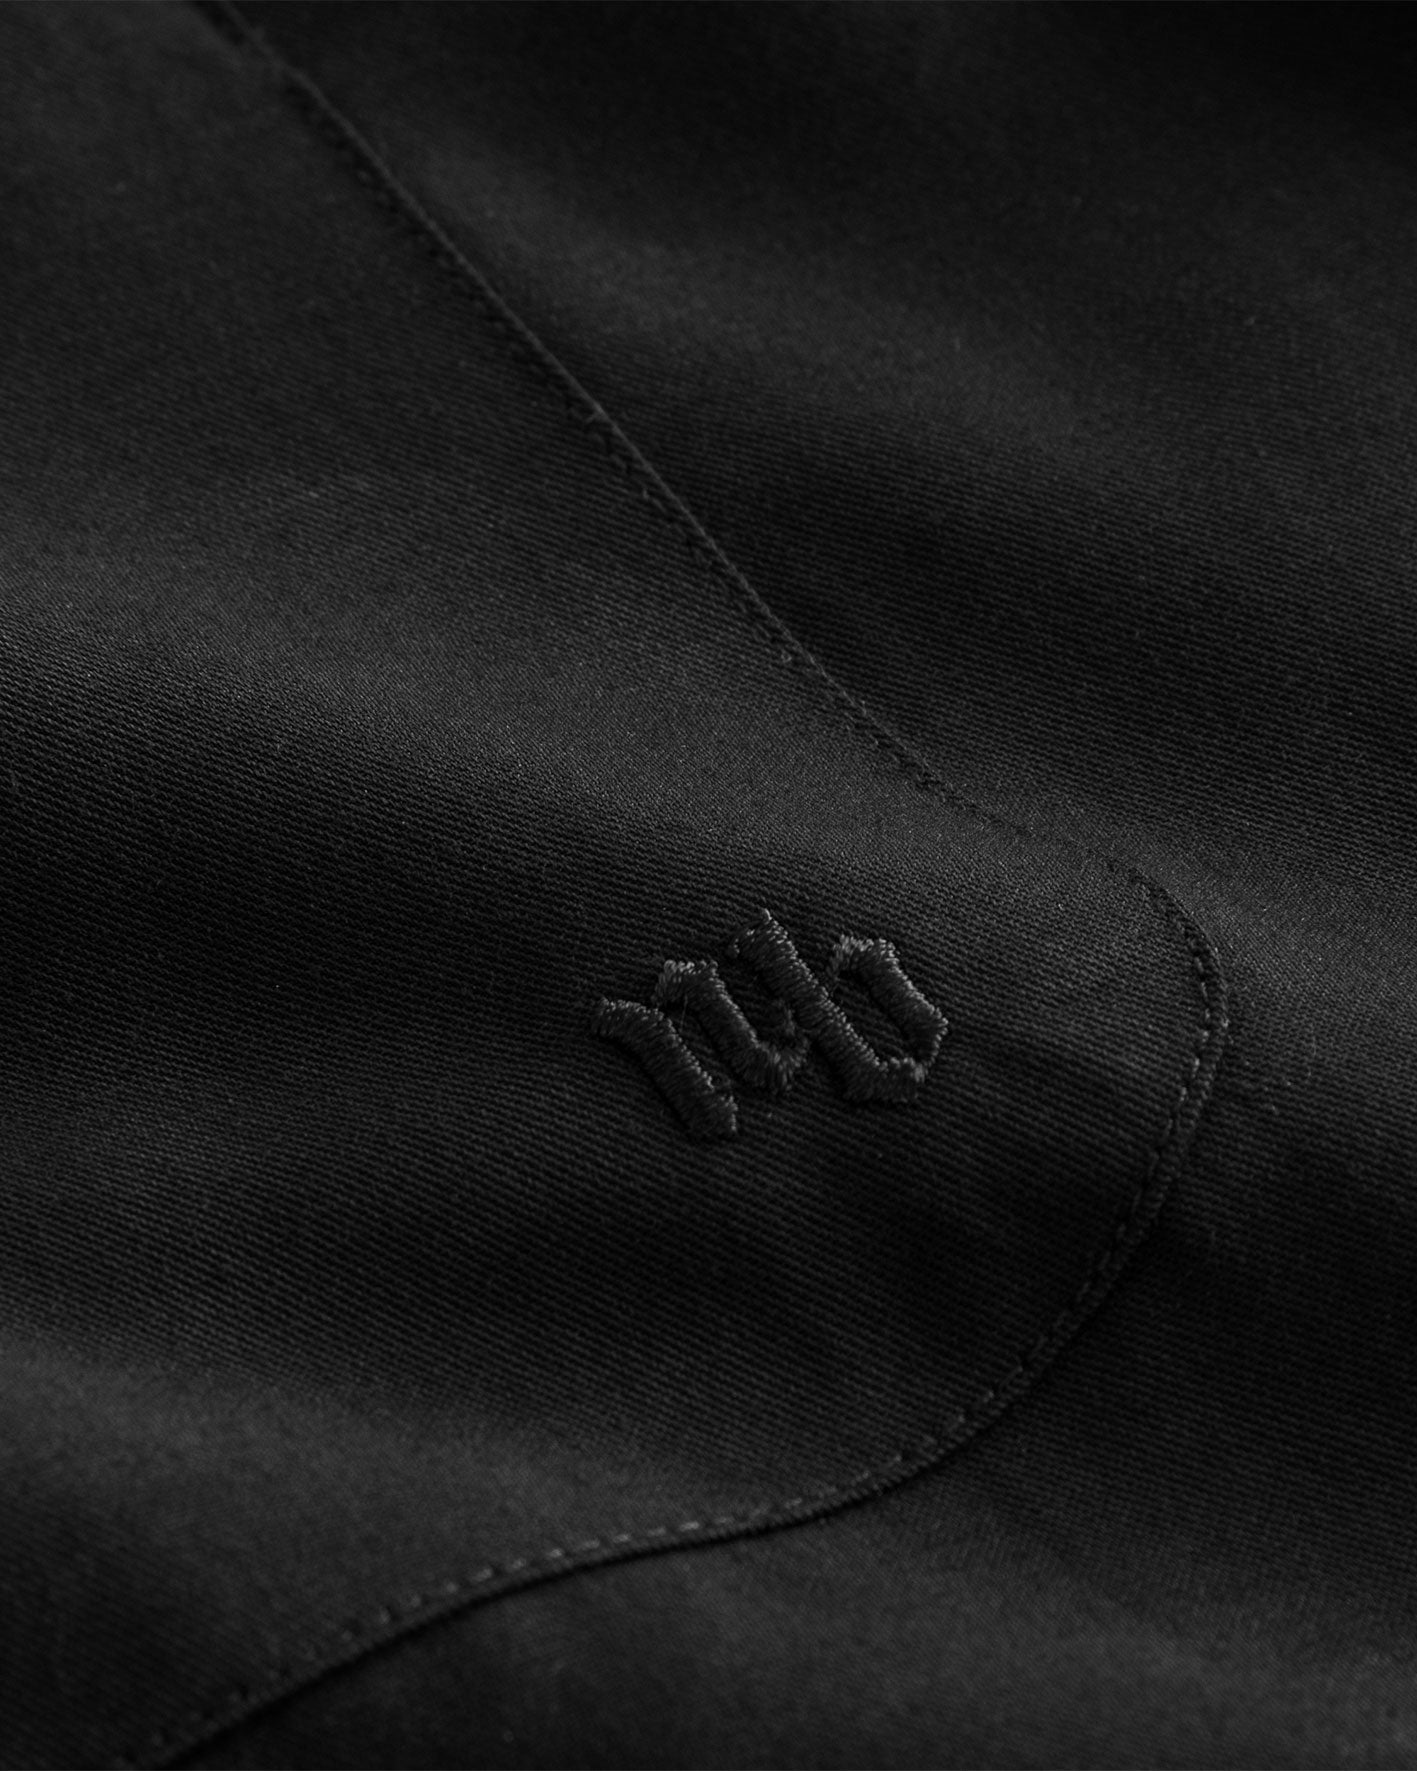 Close up of embroidery on black shirt